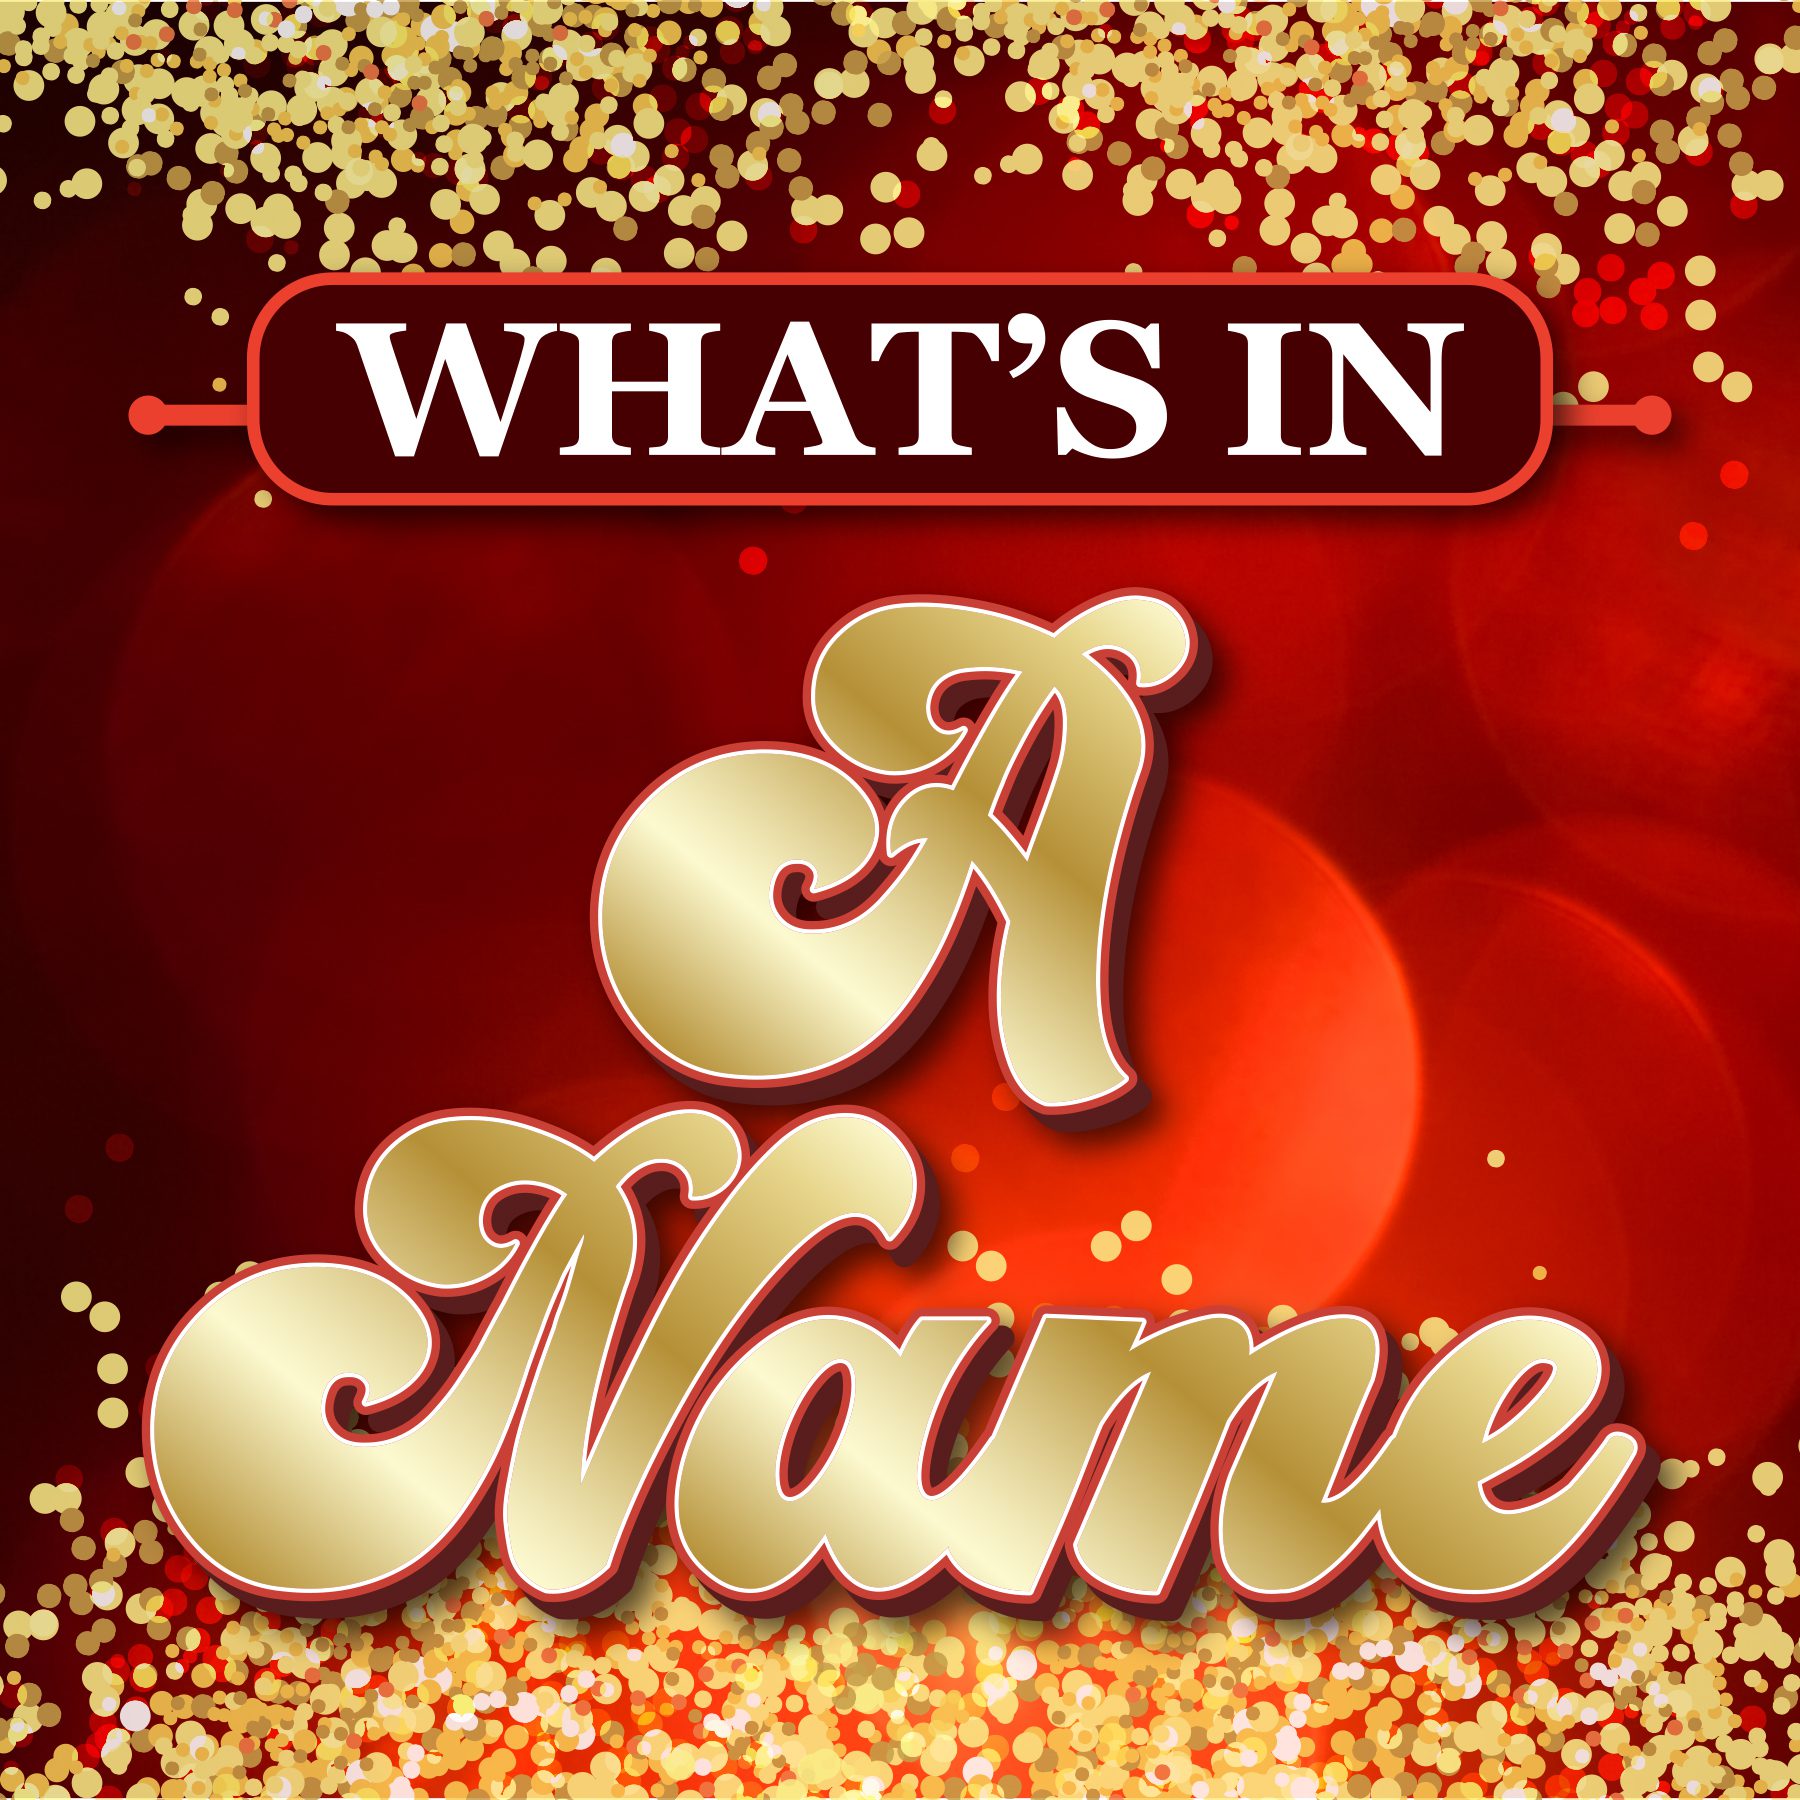 What’s In A Name Ep. 1: El Shaddai